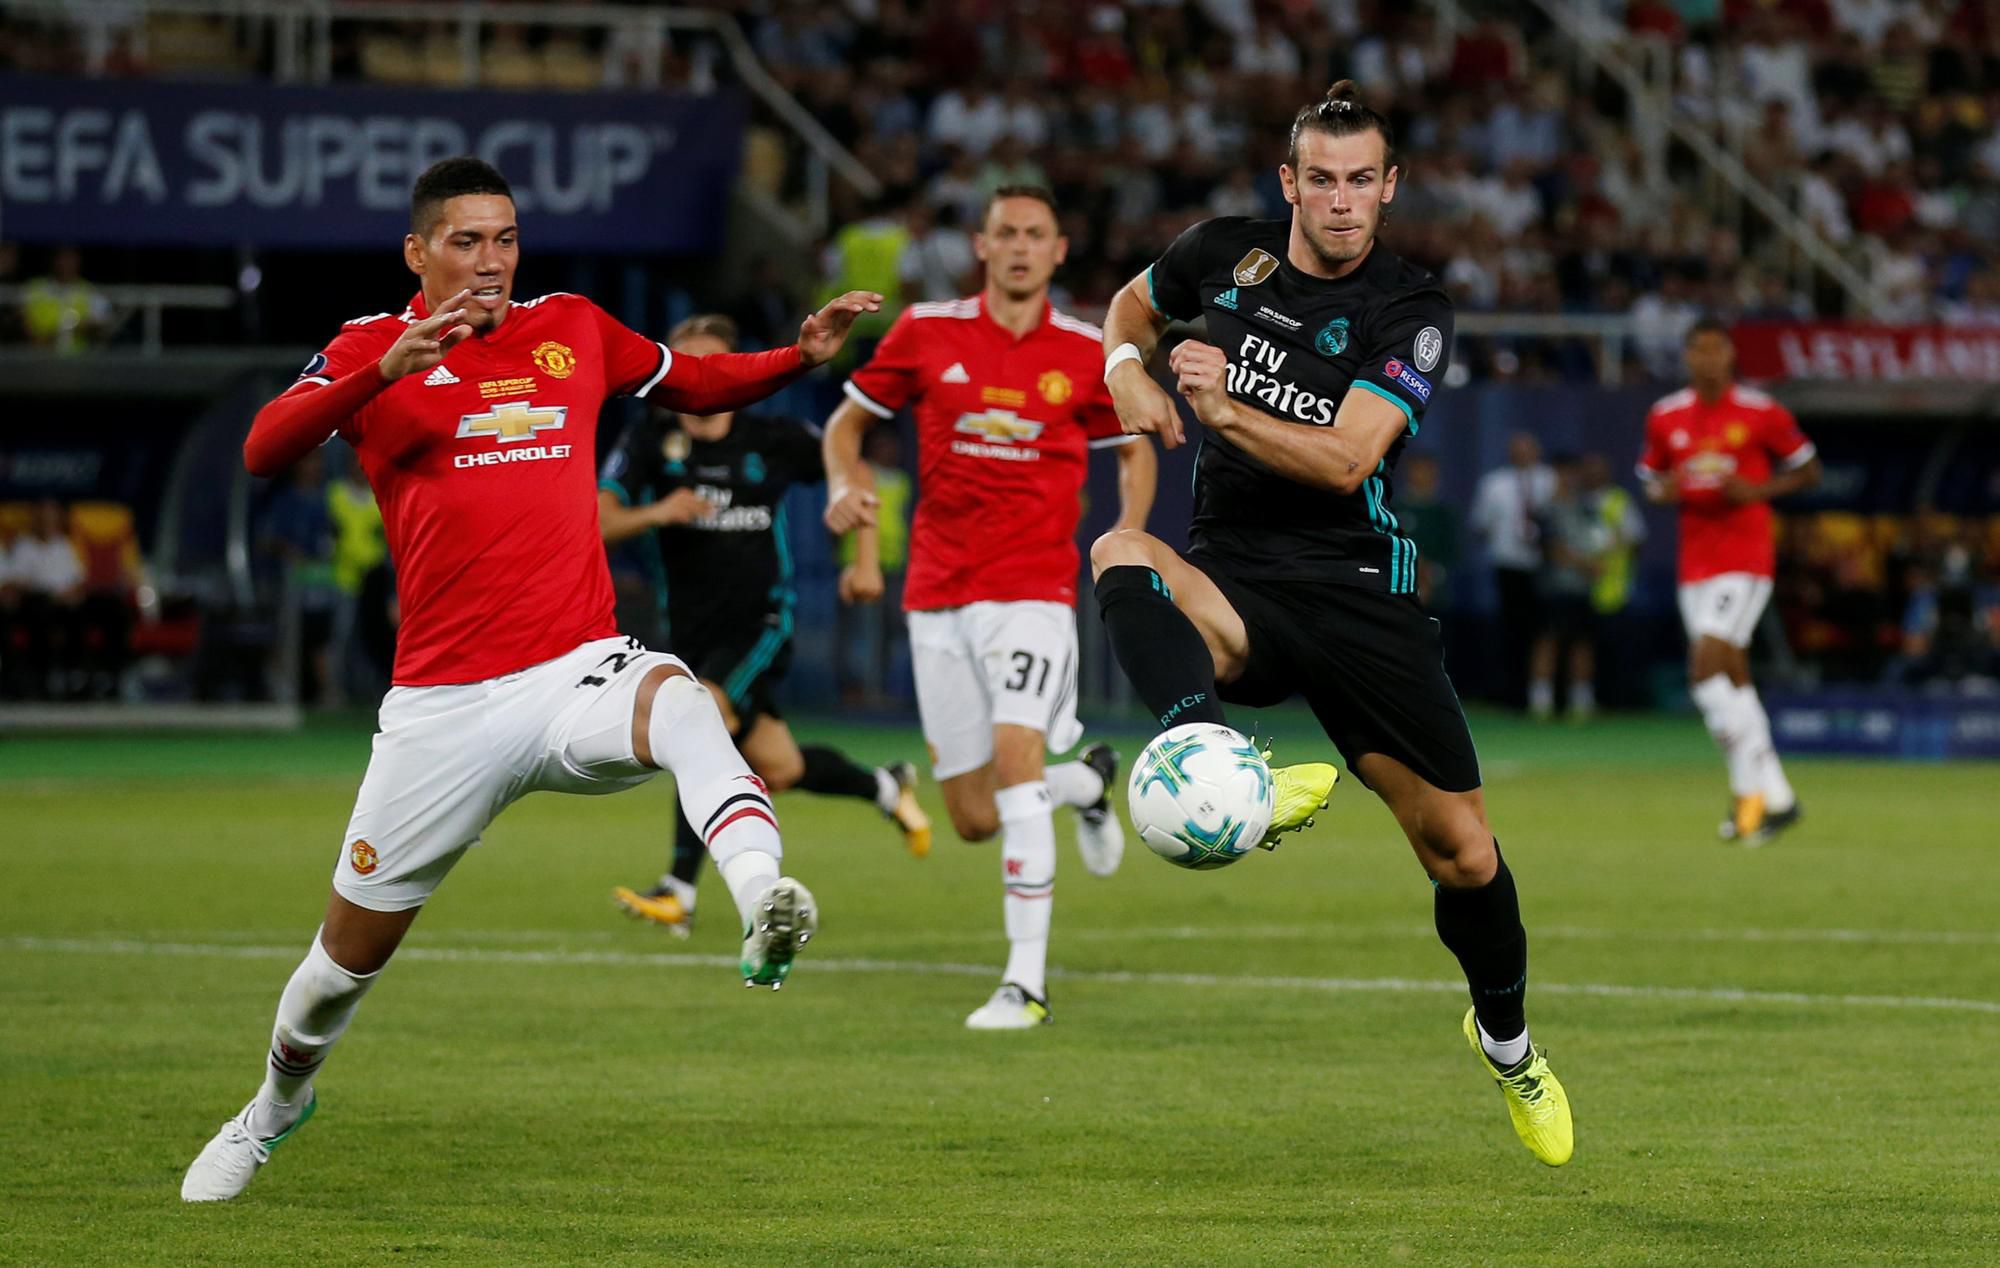 Real Madrid - Manchester United (Chris Smalling, Gareth Bale)